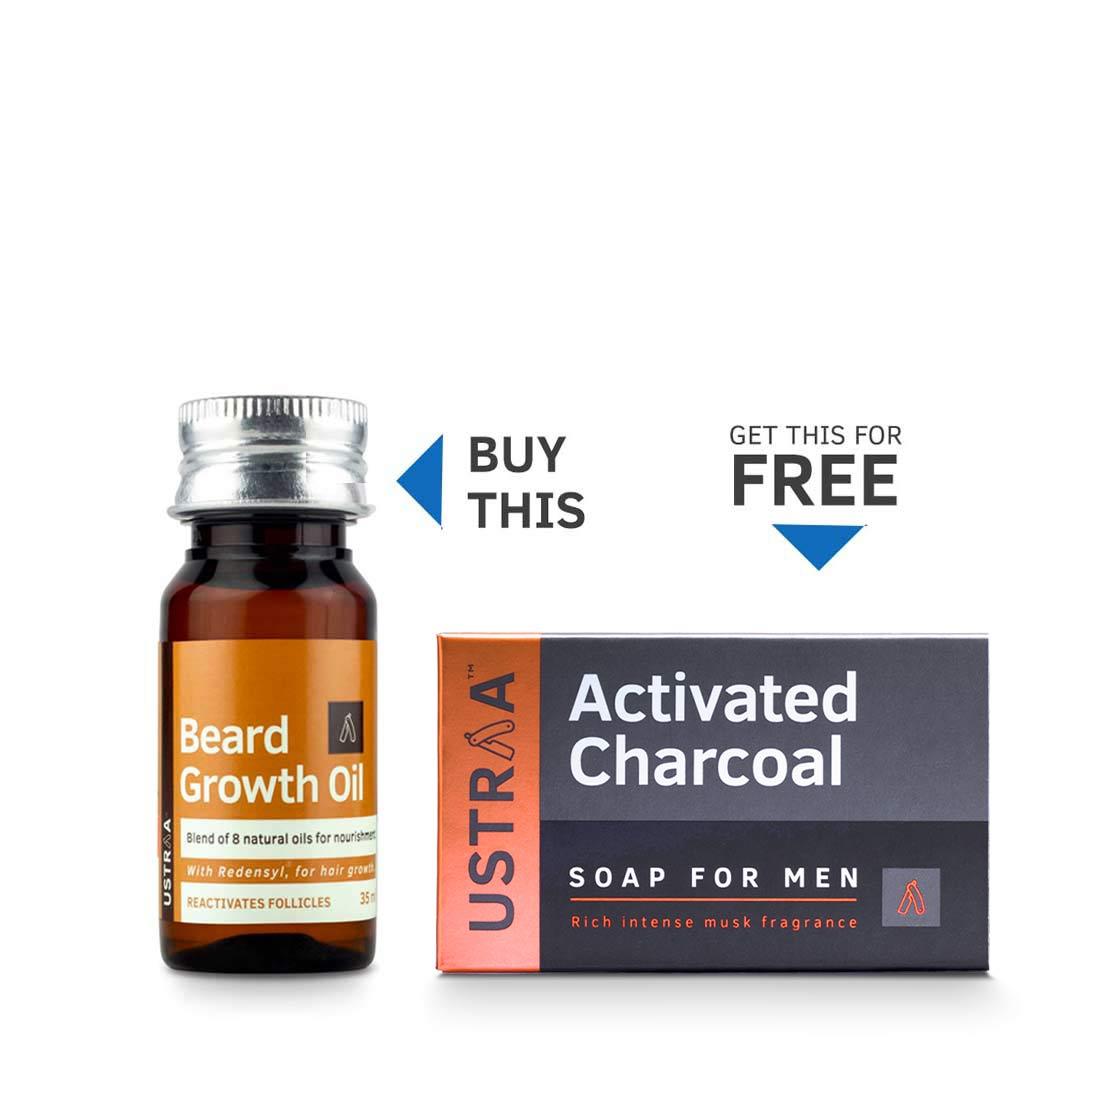 Beard Growth Oil (Get Activated Charcoal Deo Soap Free)